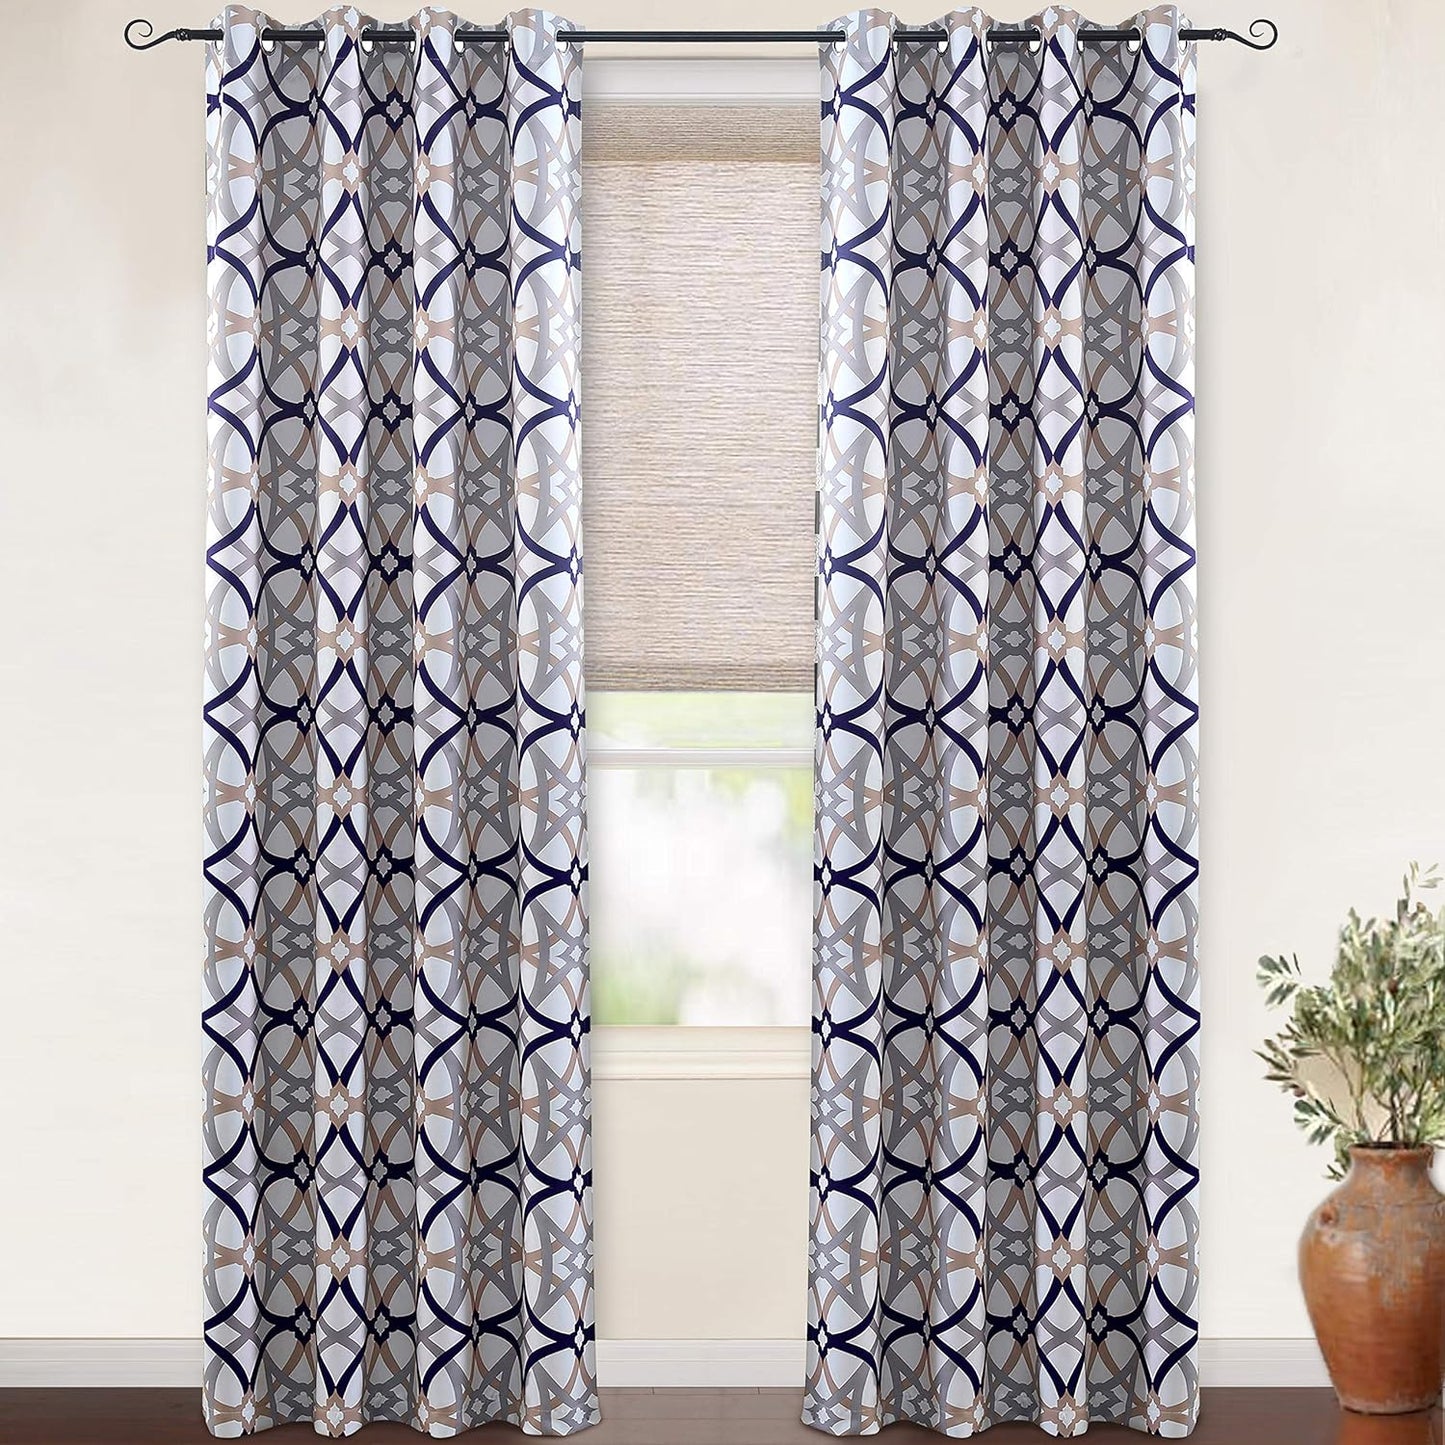 Driftaway Alexander Thermal Blackout Grommet Unlined Window Curtains Spiral Geo Trellis Pattern Set of 2 Panels Each Size 52 Inch by 84 Inch Red and Gray  DriftAway Navy/Gray 52"X108" 